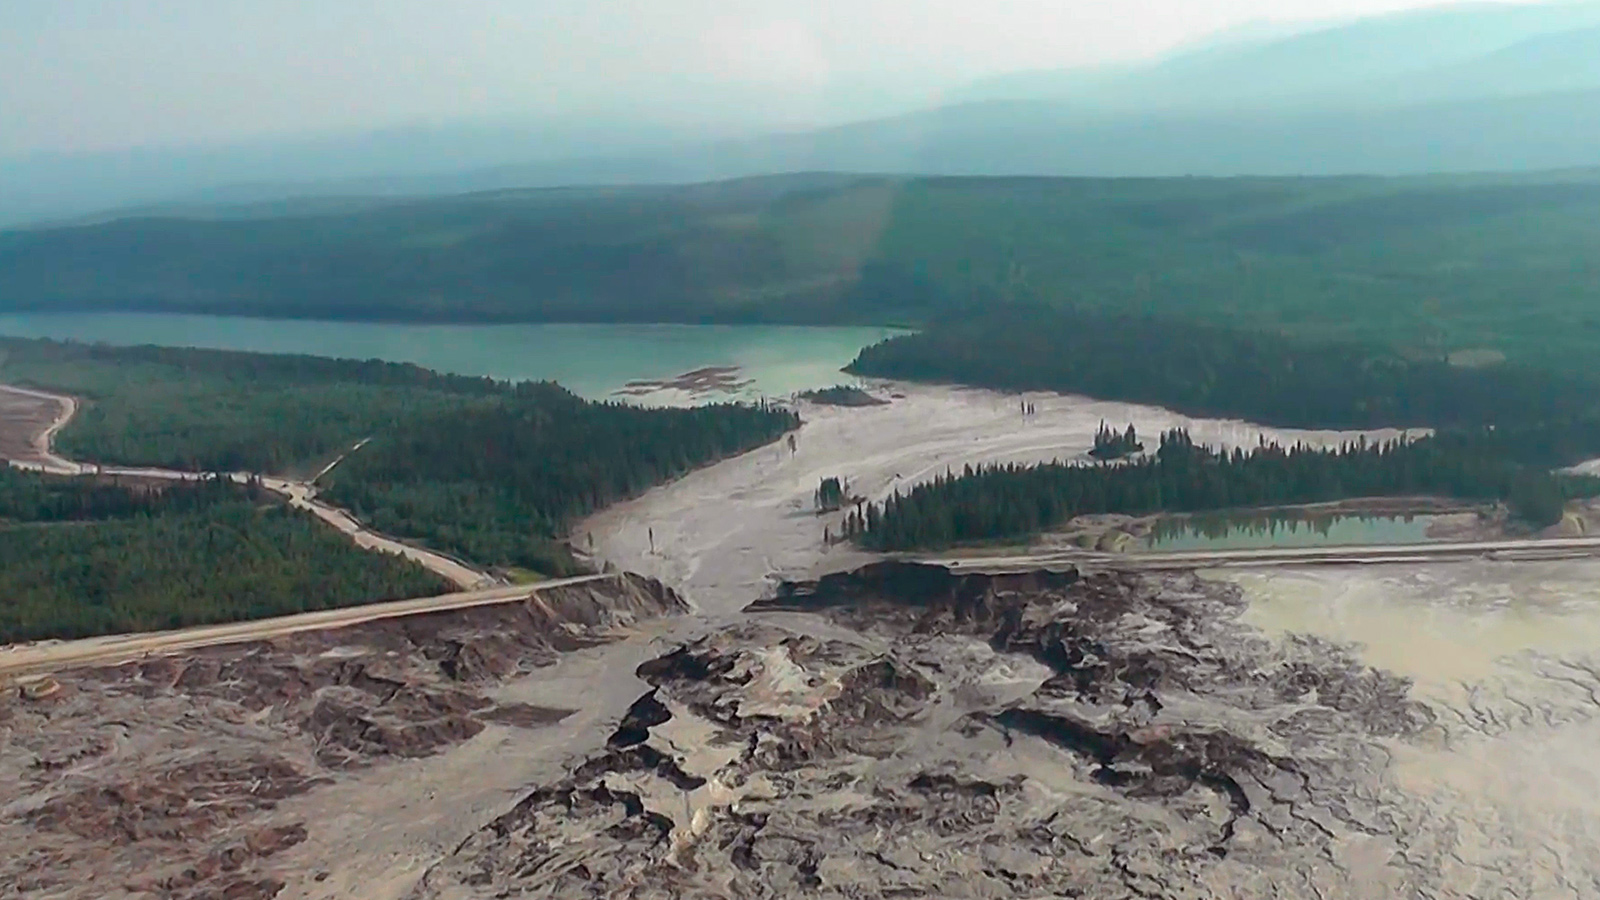 The results of a tailing pond breach at Imperial Metals Corp's gold and copper mine at Mount Polley in central British Columbia are pictured August 4, 2014